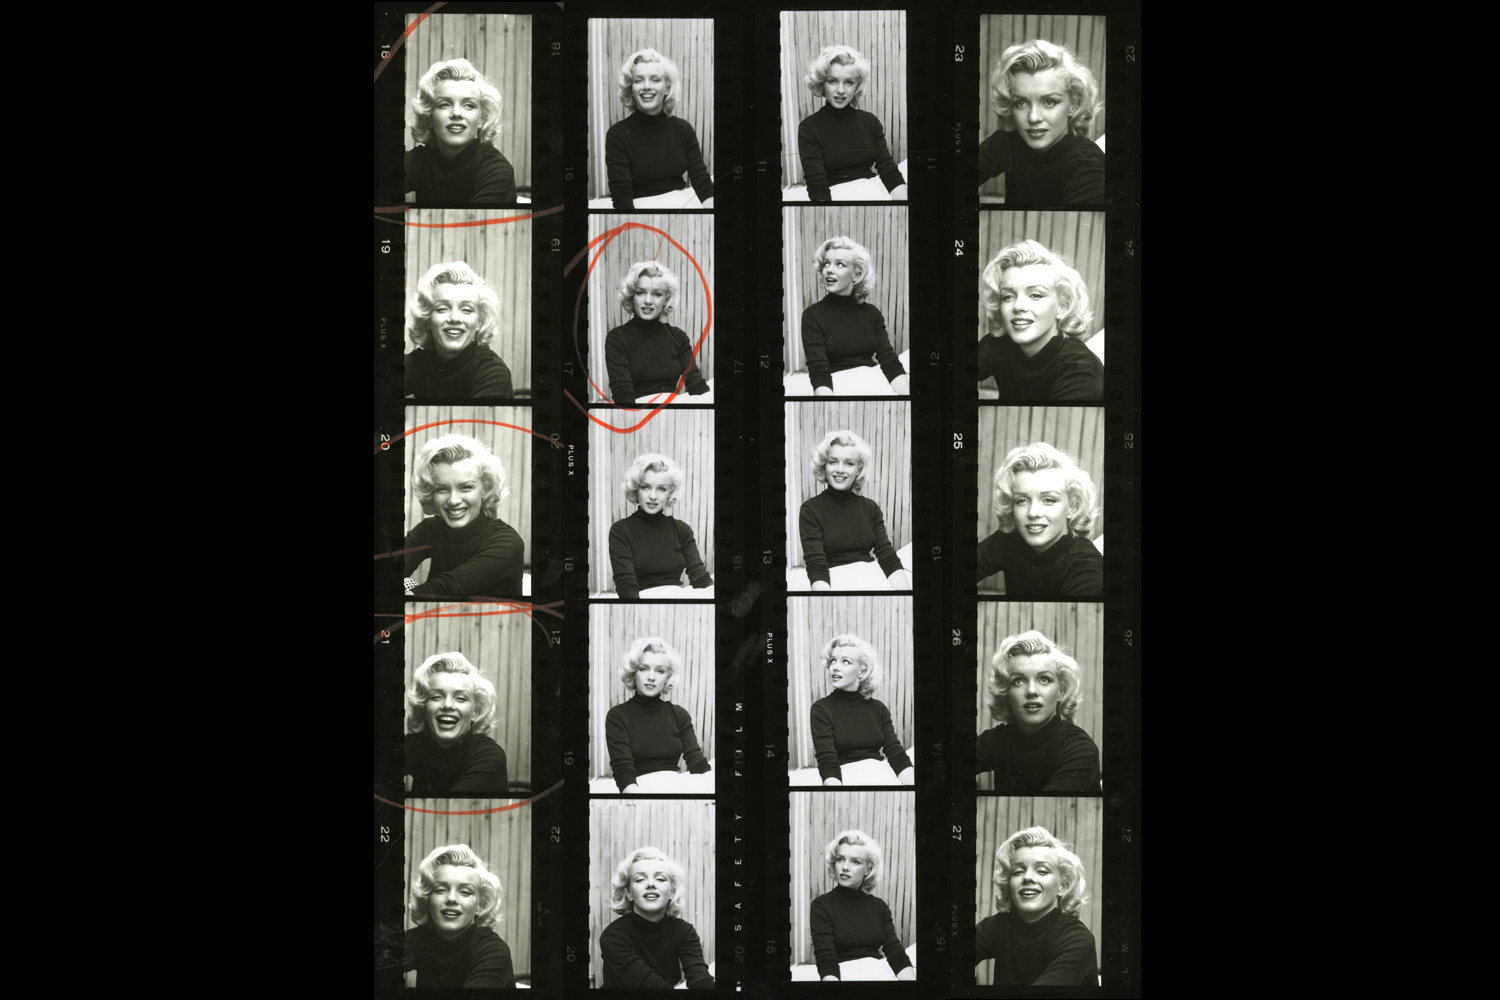 Black and white contact sheet from Alfred Eisenstaedt's 1953 photo shoot with Marilyn Monroe.